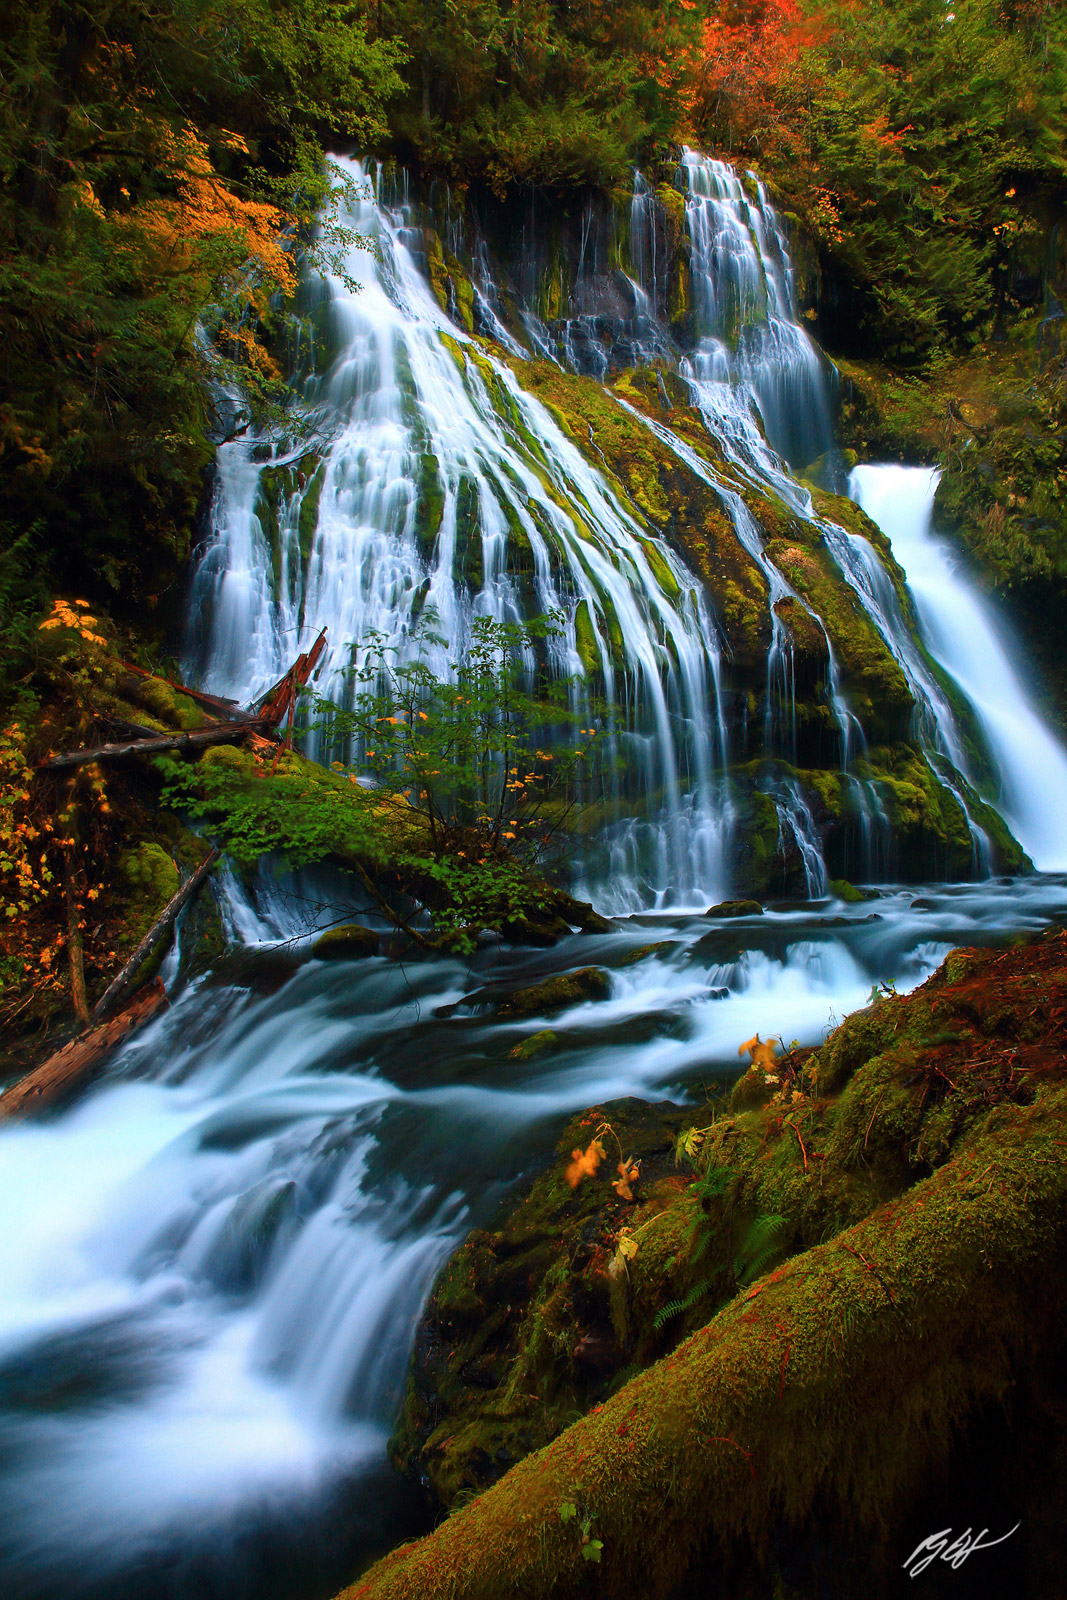 Fall Color and Panther Creek Falls in the Gifford-Pinchot National Forest in Washington